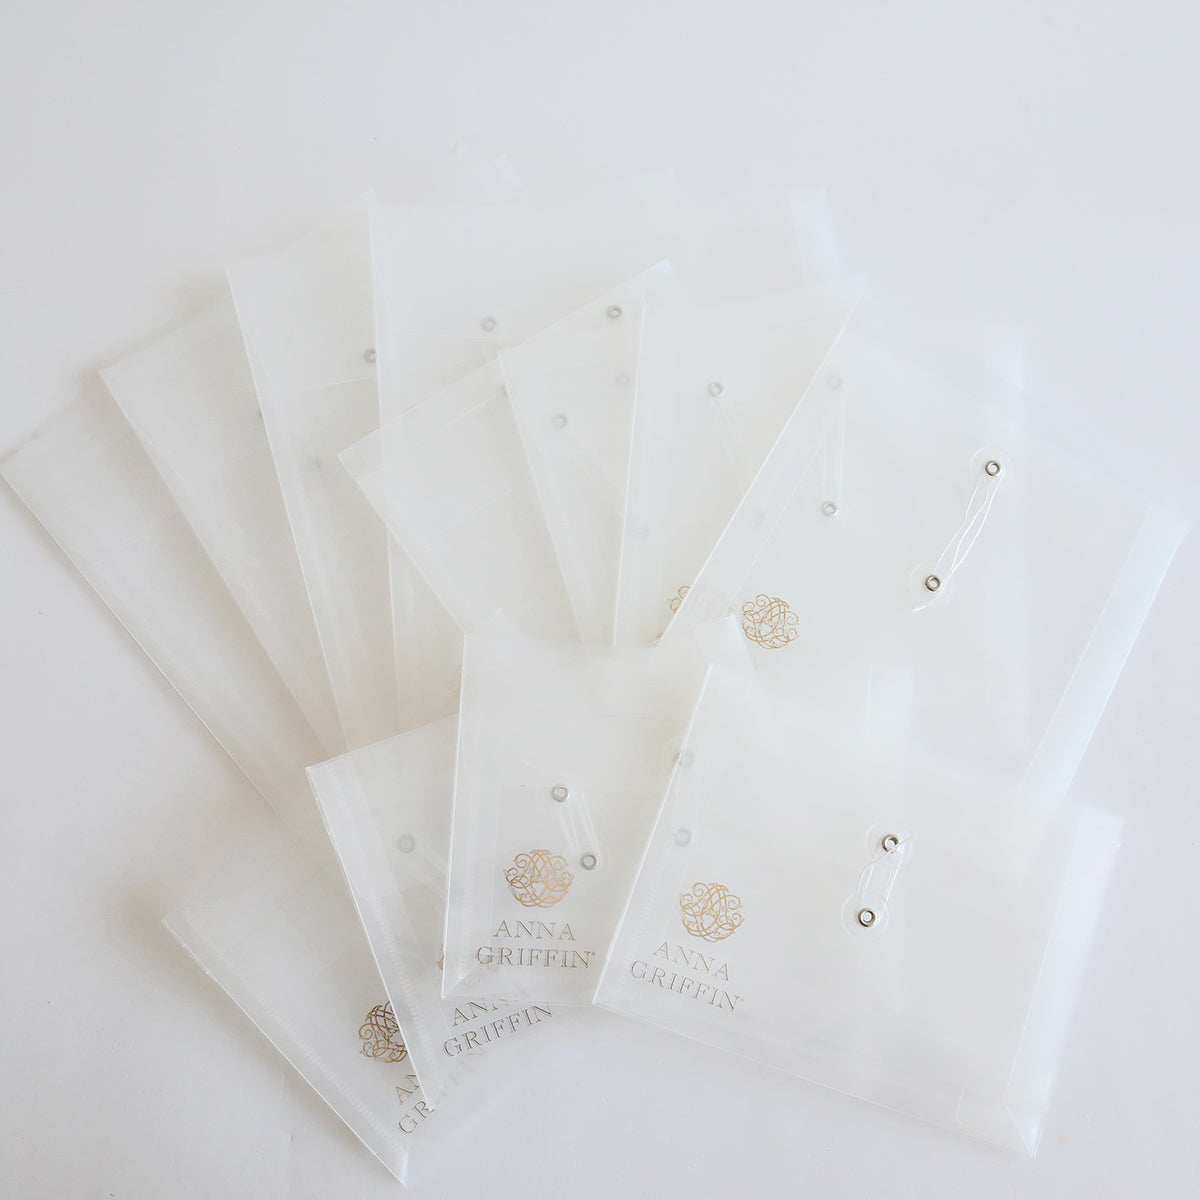 Anna Griffin Assorted Pouch Storage 12 count, A group of white envelopes with a gold logo on them.